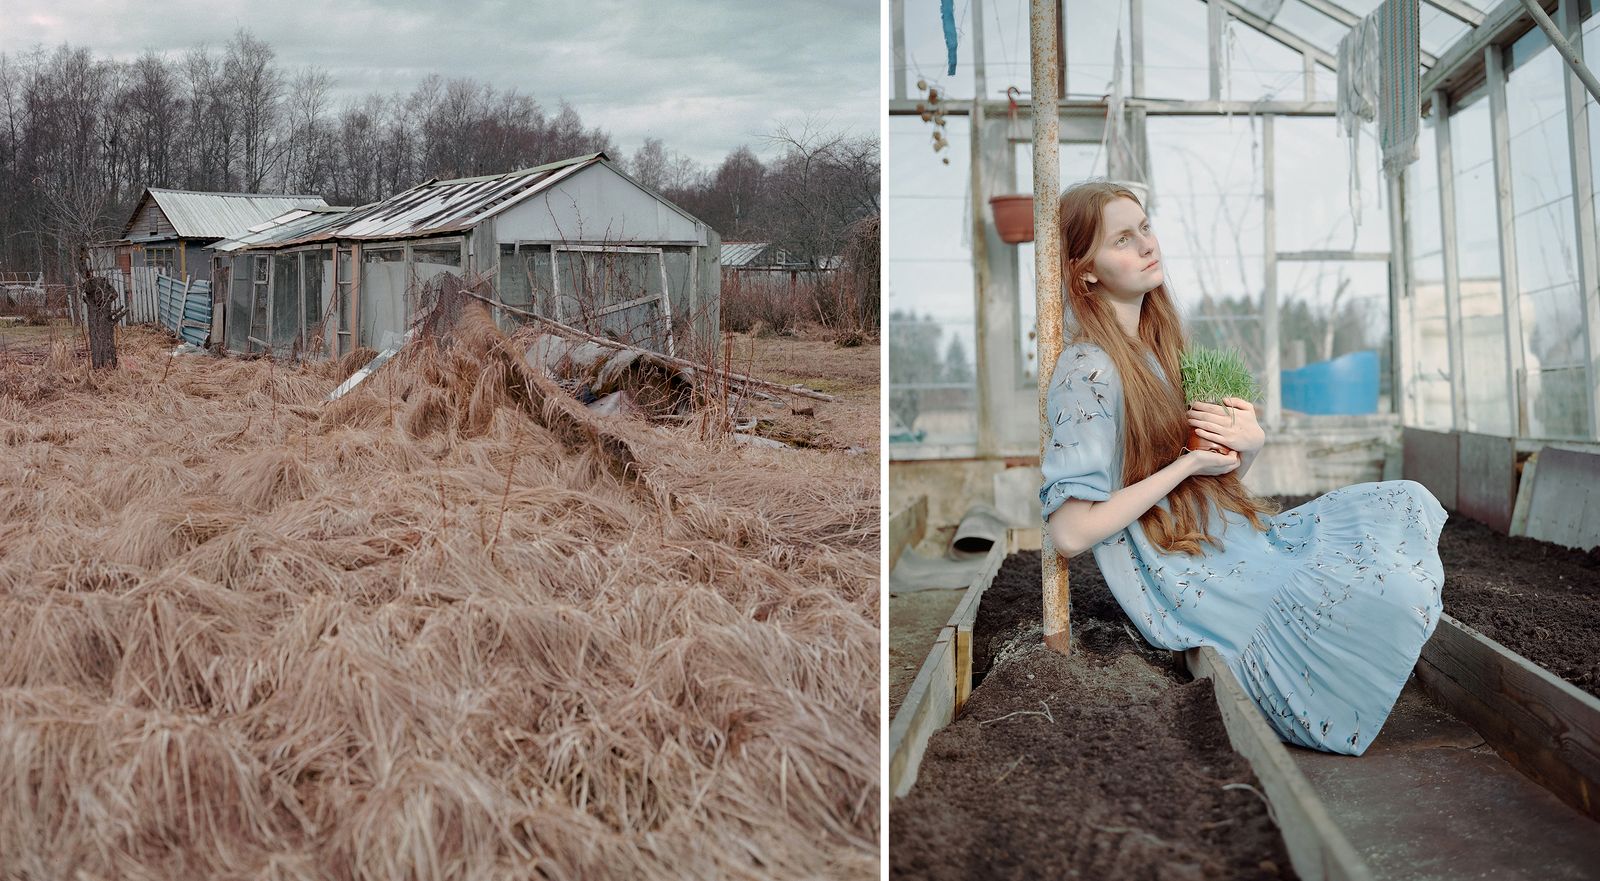 © Annika Haas - Image from the Greenhouse Effect photography project